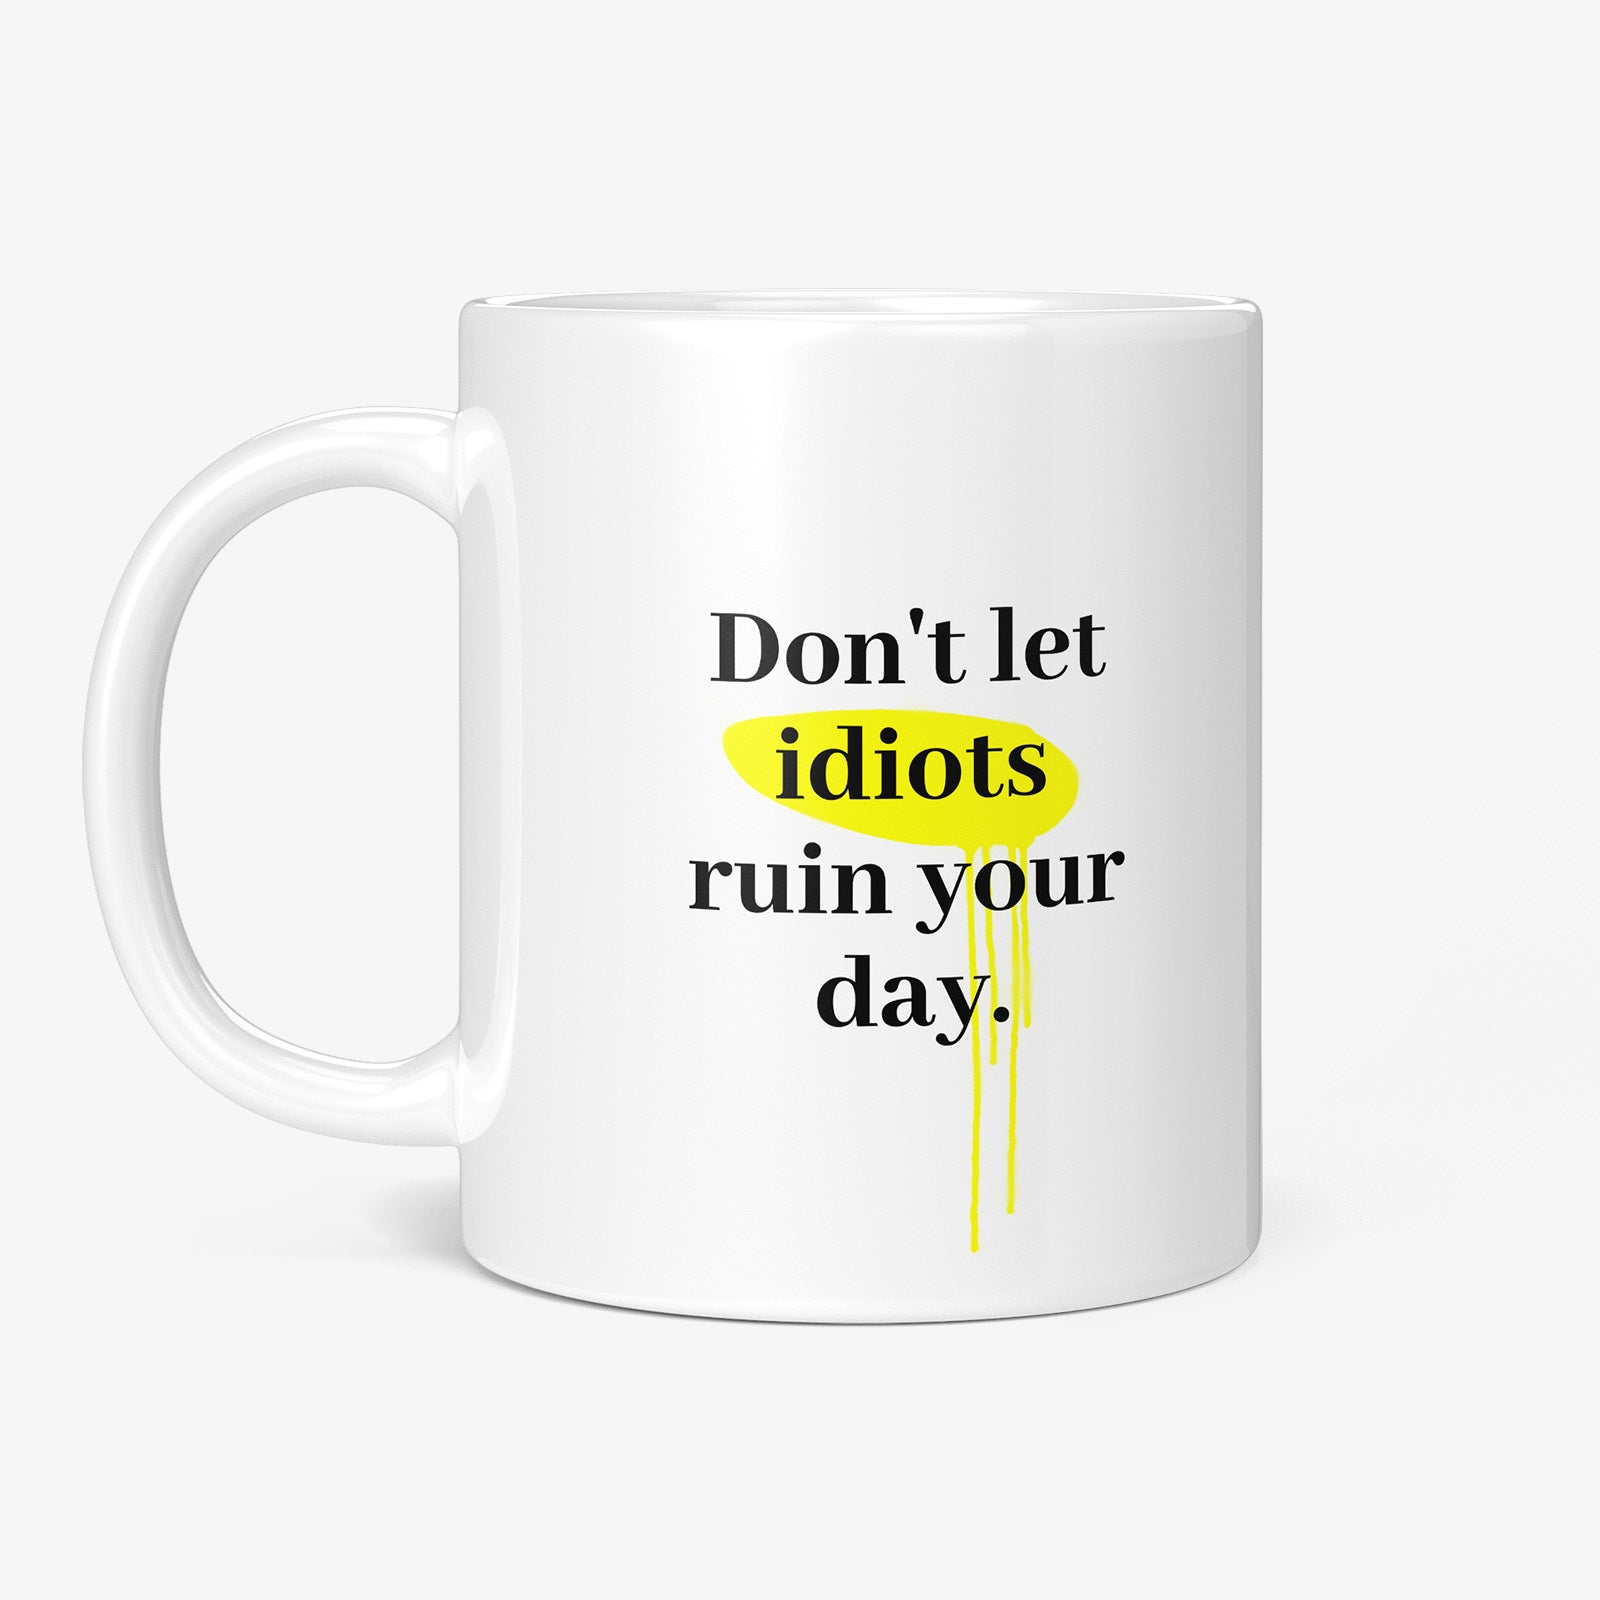 Get inspired by the quote, "Don't let idiots ruin your day" on this 11oz white glossy coffee mug with the handle on the left.